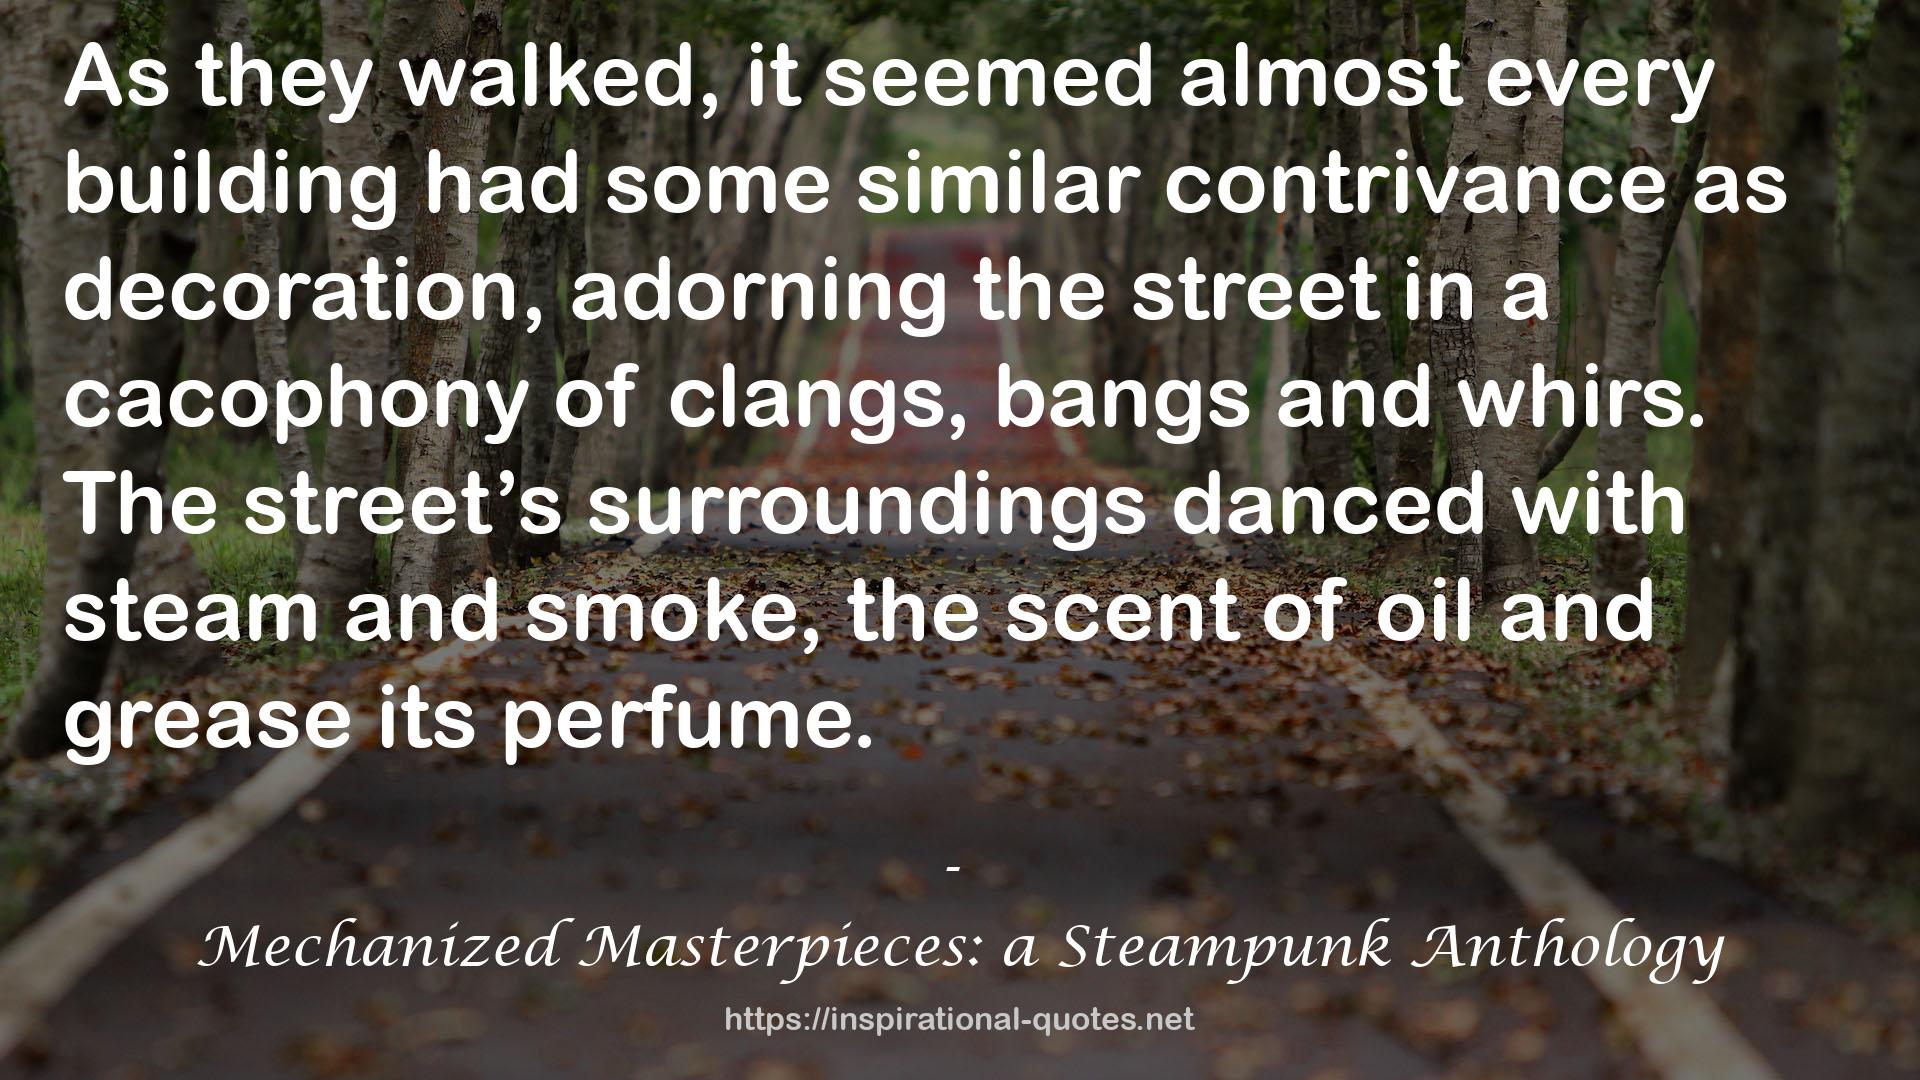 Mechanized Masterpieces: a Steampunk Anthology QUOTES